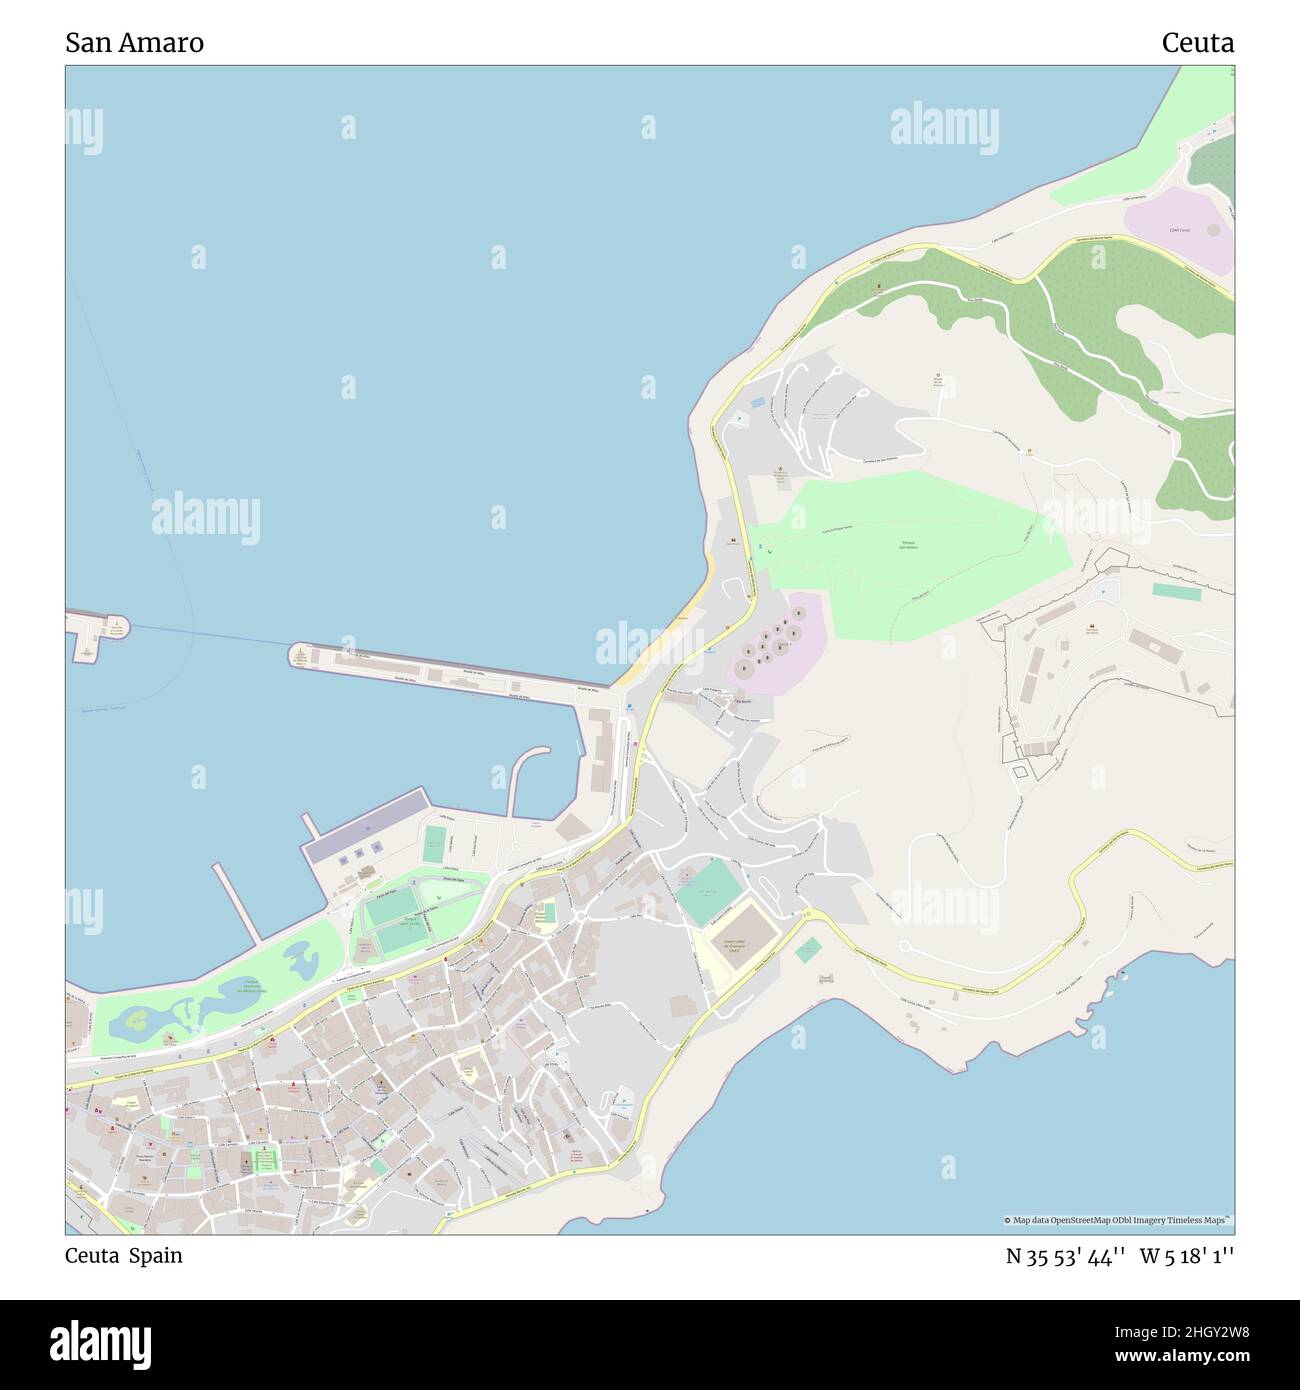 San Amaro, Ceuta, Spain, Ceuta, N 35 53' 44'', W 5 18' 1'', map, Timeless Map published in 2021. Travelers, explorers and adventurers like Florence Nightingale, David Livingstone, Ernest Shackleton, Lewis and Clark and Sherlock Holmes relied on maps to plan travels to the world's most remote corners, Timeless Maps is mapping most locations on the globe, showing the achievement of great dreams Stock Photo